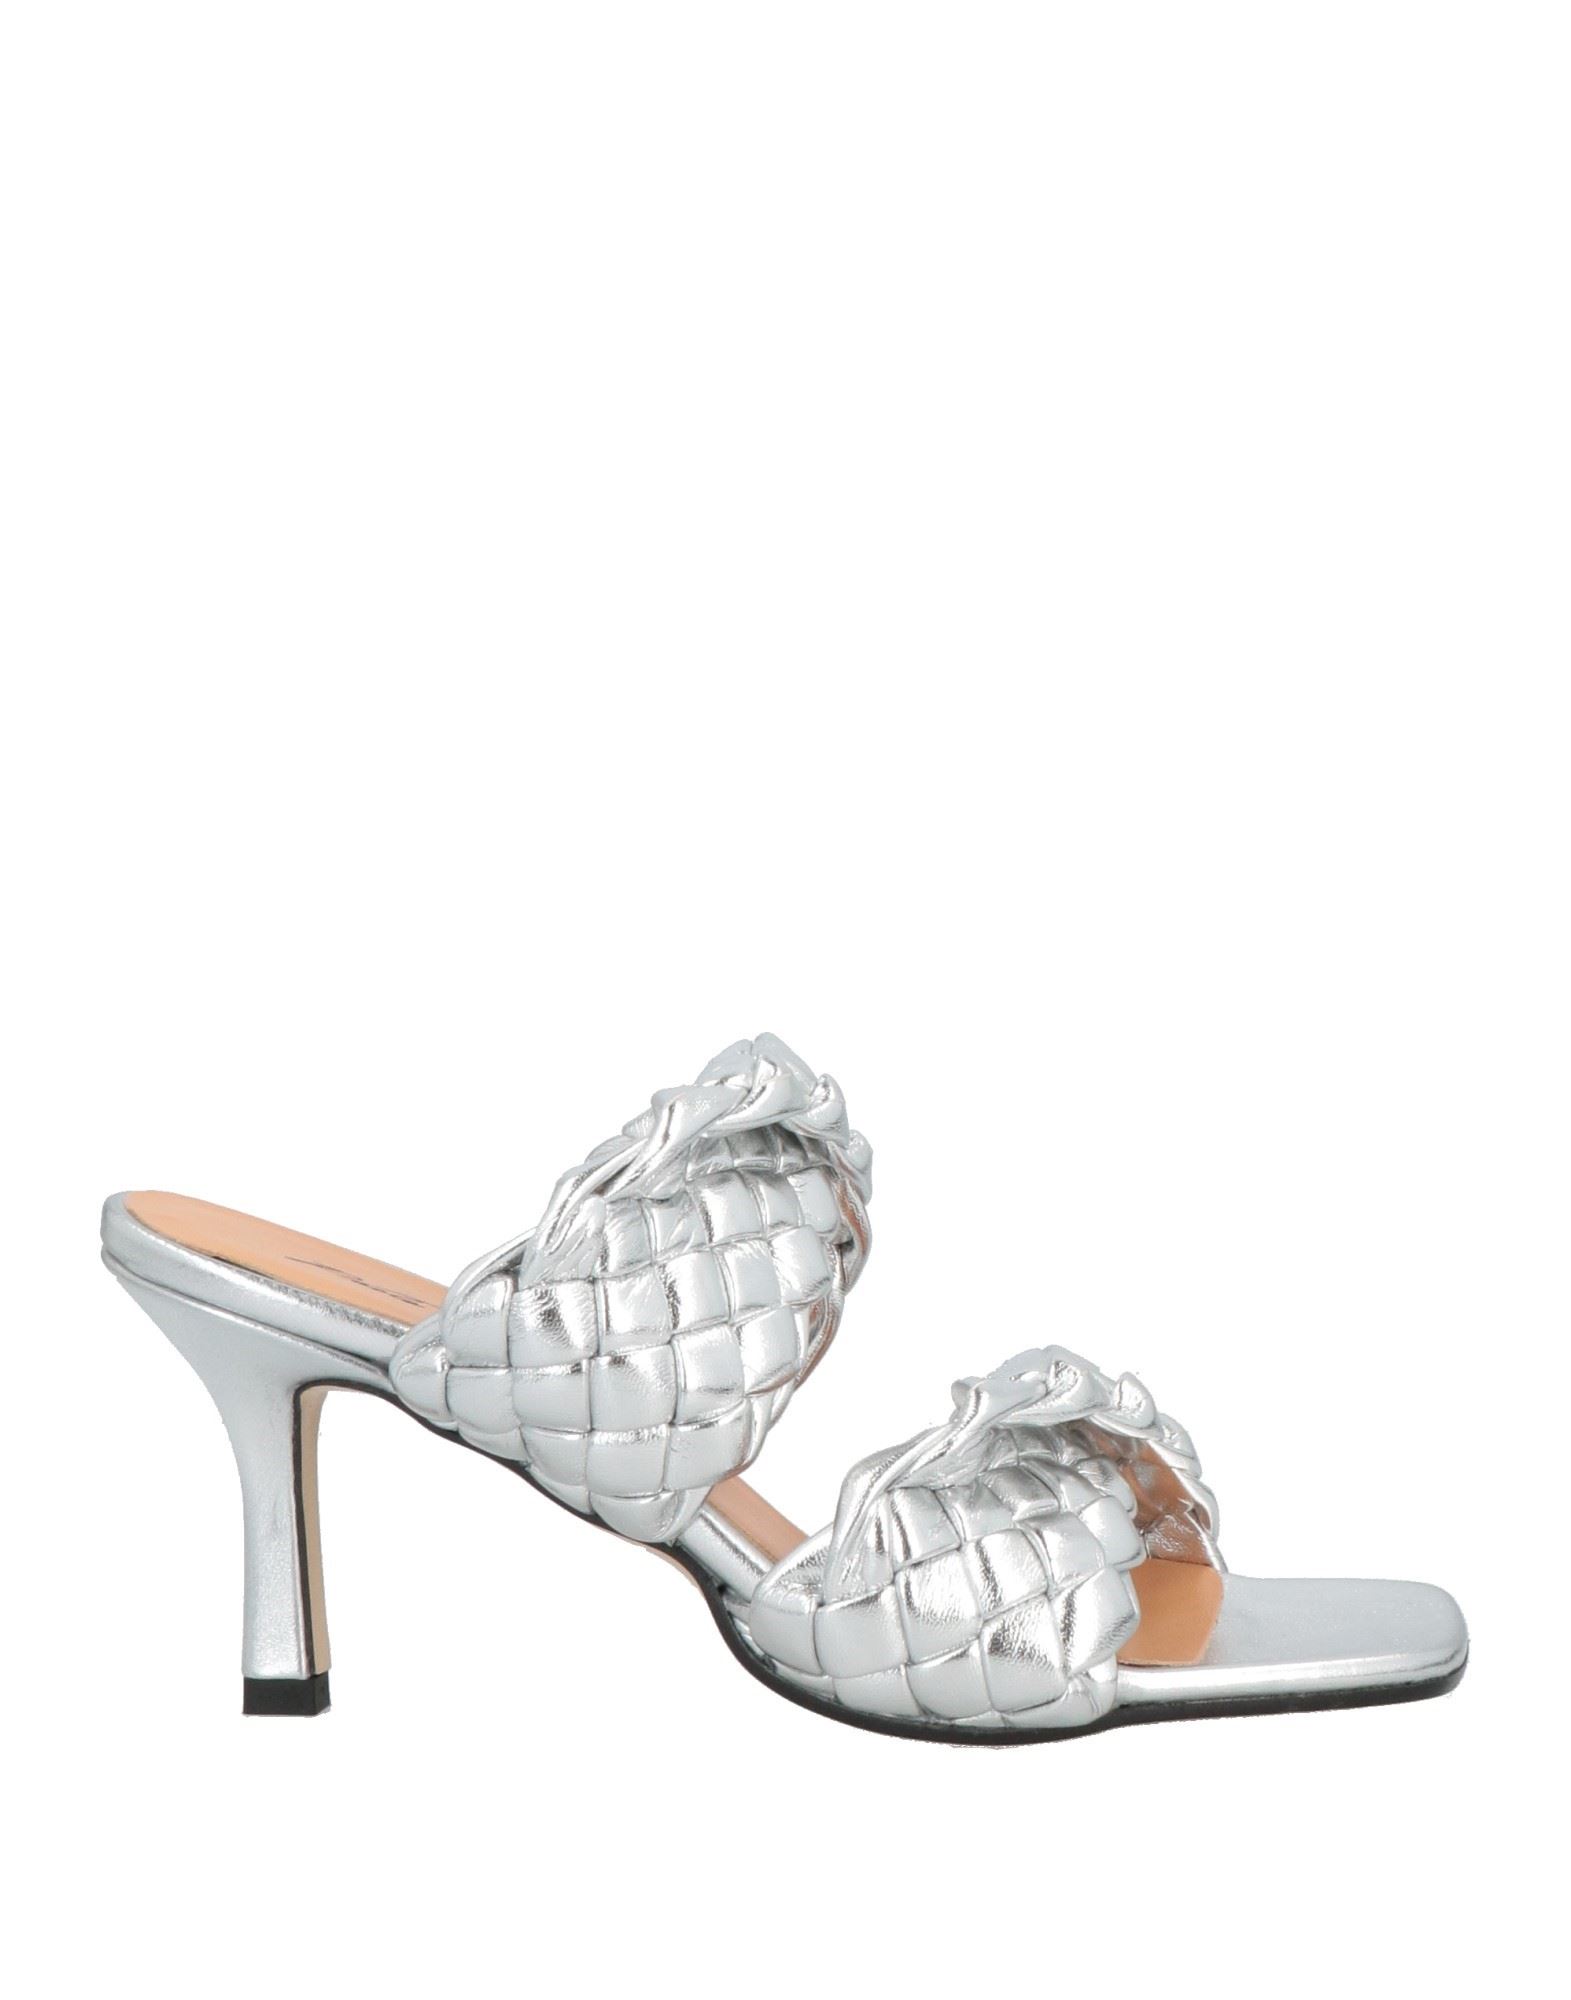 Paolo Mattei Sandals In Silver